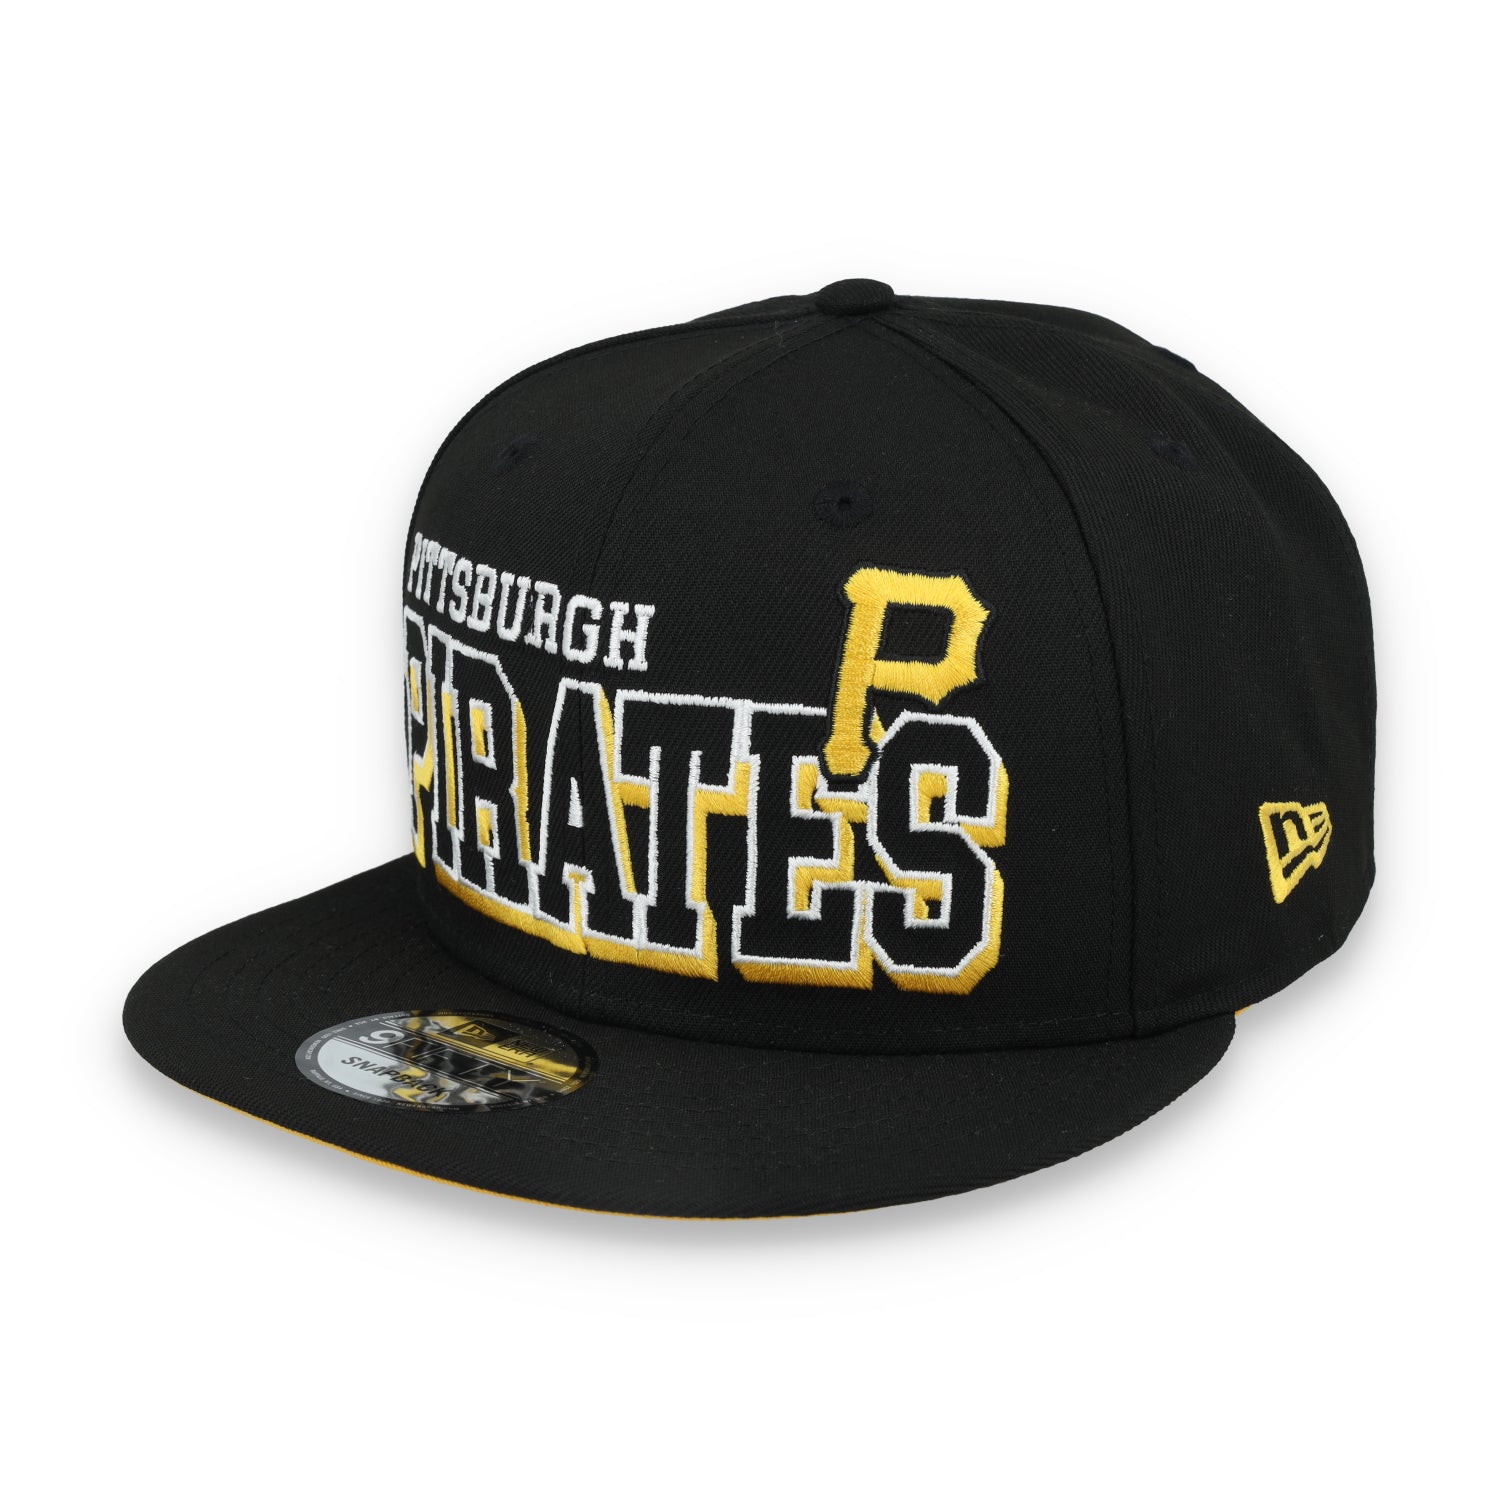 New Era Pittsburgh Pirates Game Day 9FIFTY Snapback Hat